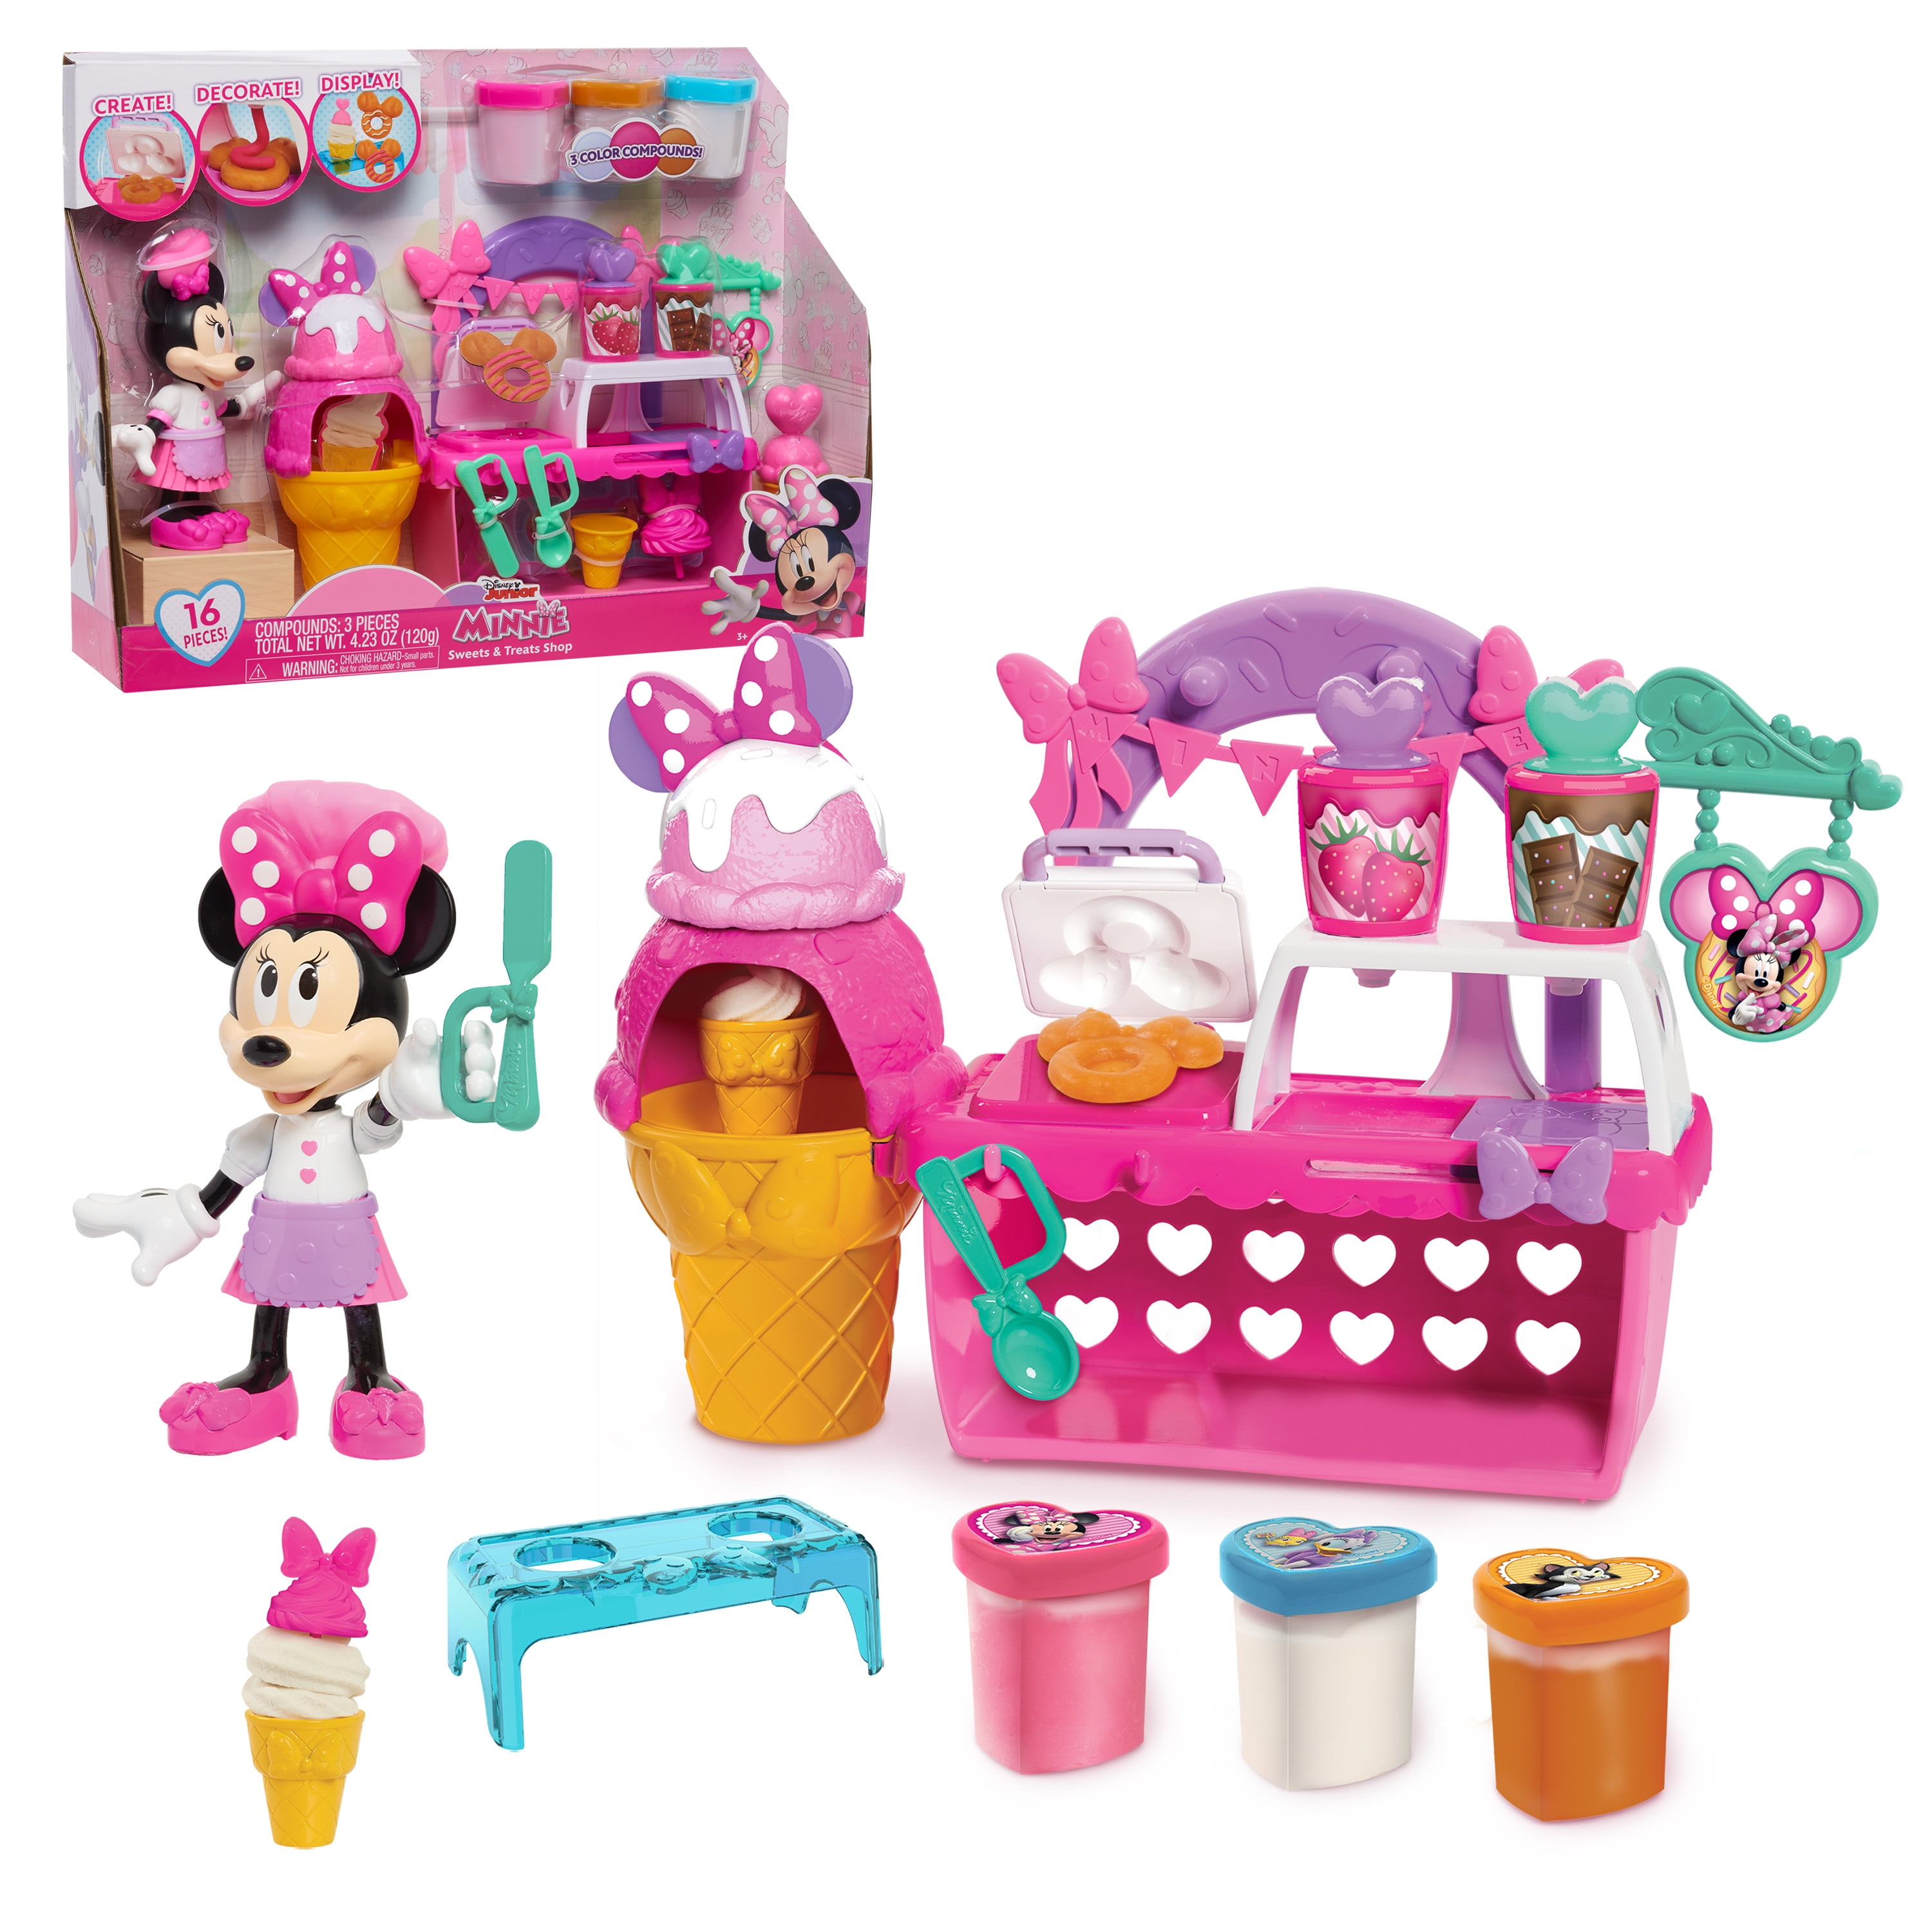 Buy Disney Junior Minnie Mouse Sweets And Treats Shop 16 Piece Pretend